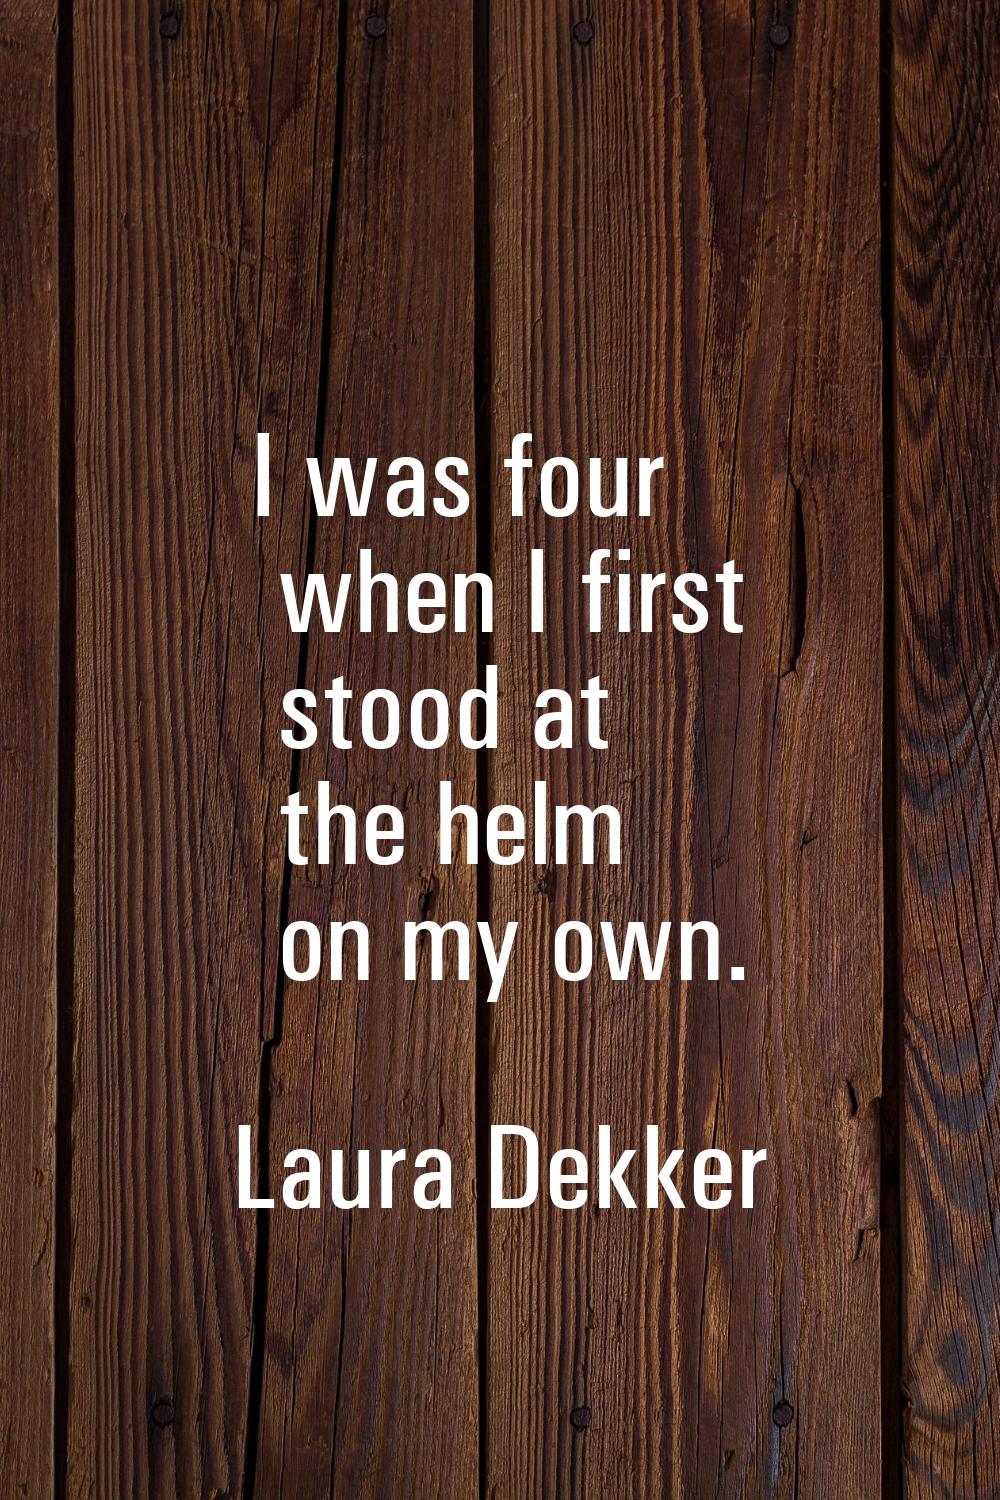 I was four when I first stood at the helm on my own.